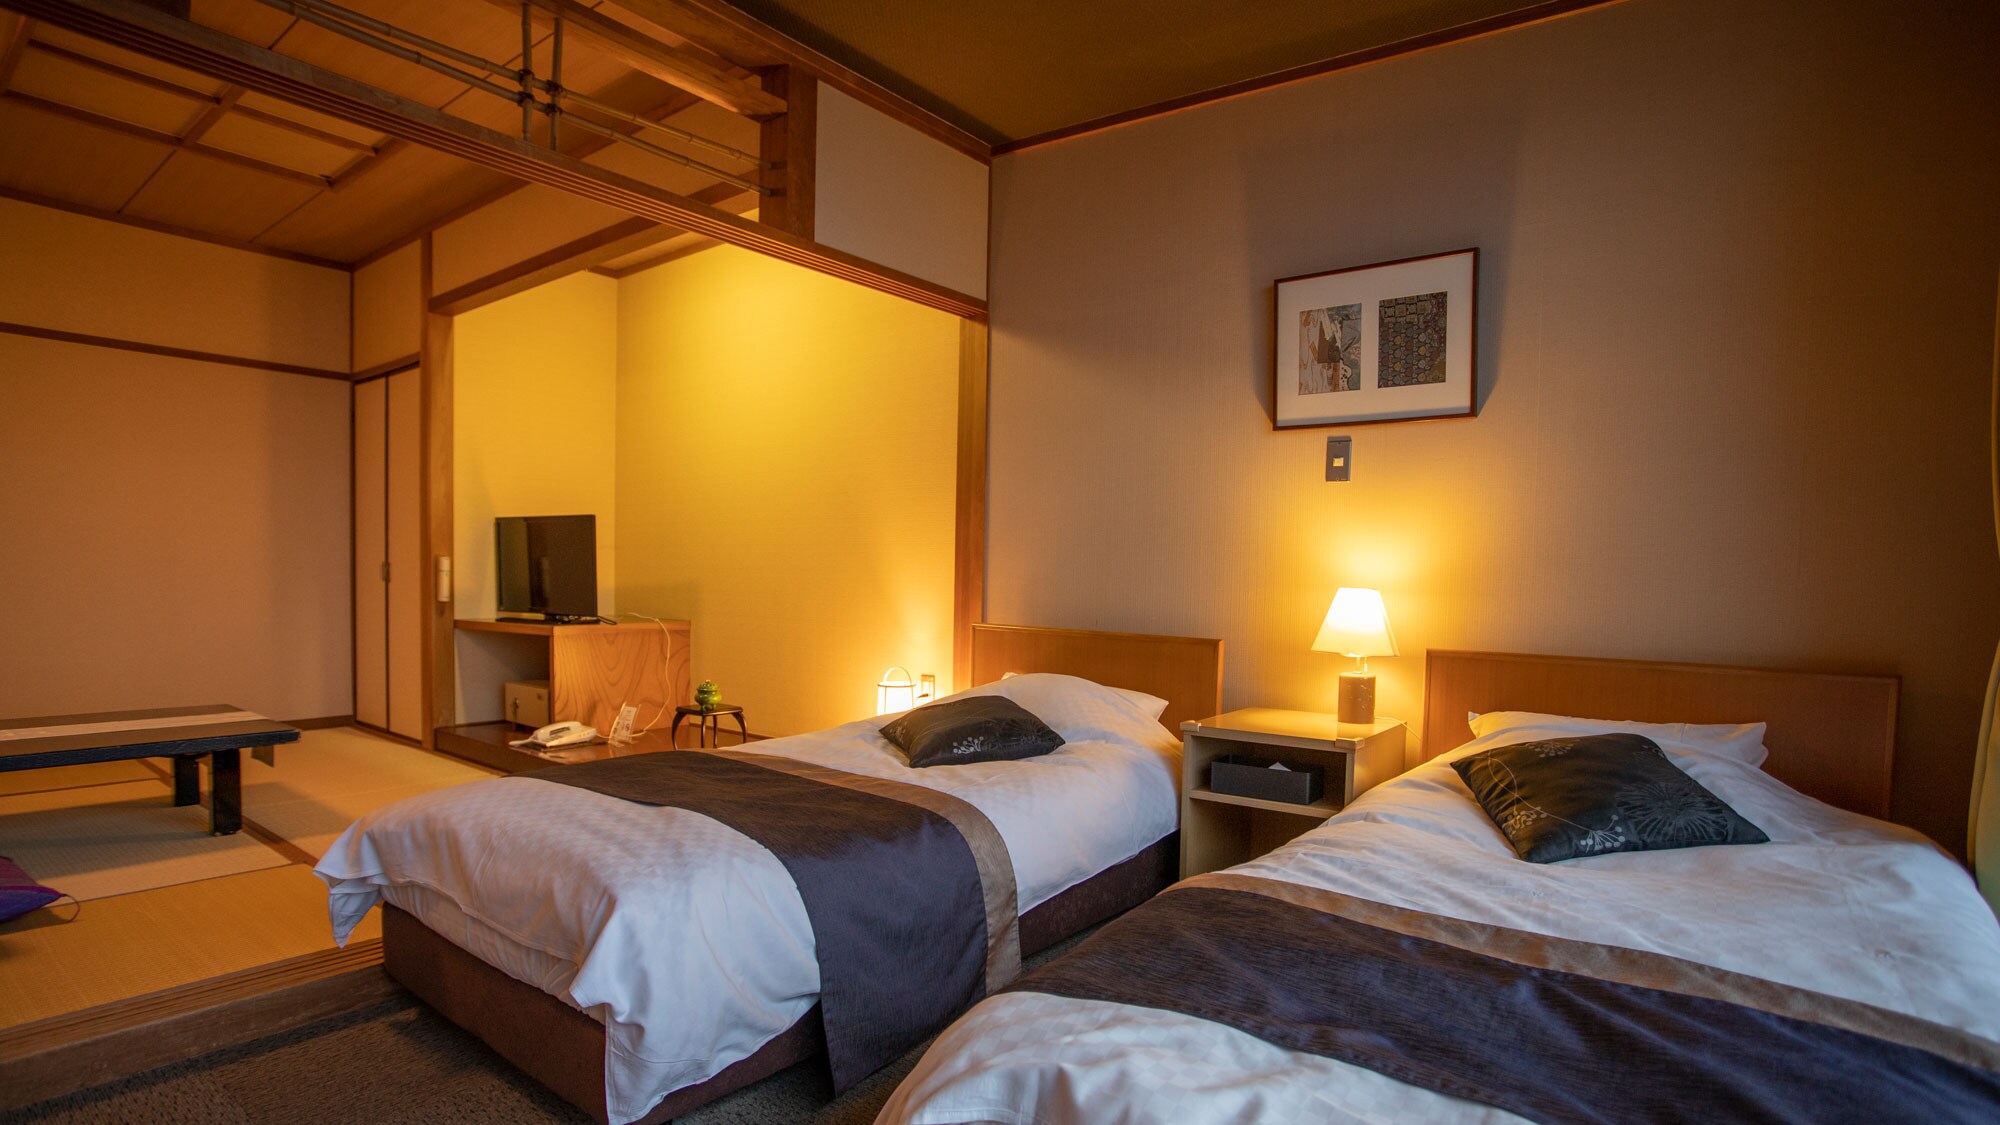 A Japanese-Western style room that combines the calmness of a Japanese inn with the convenience of a hotel. We can also prepare a room with a high table, so please